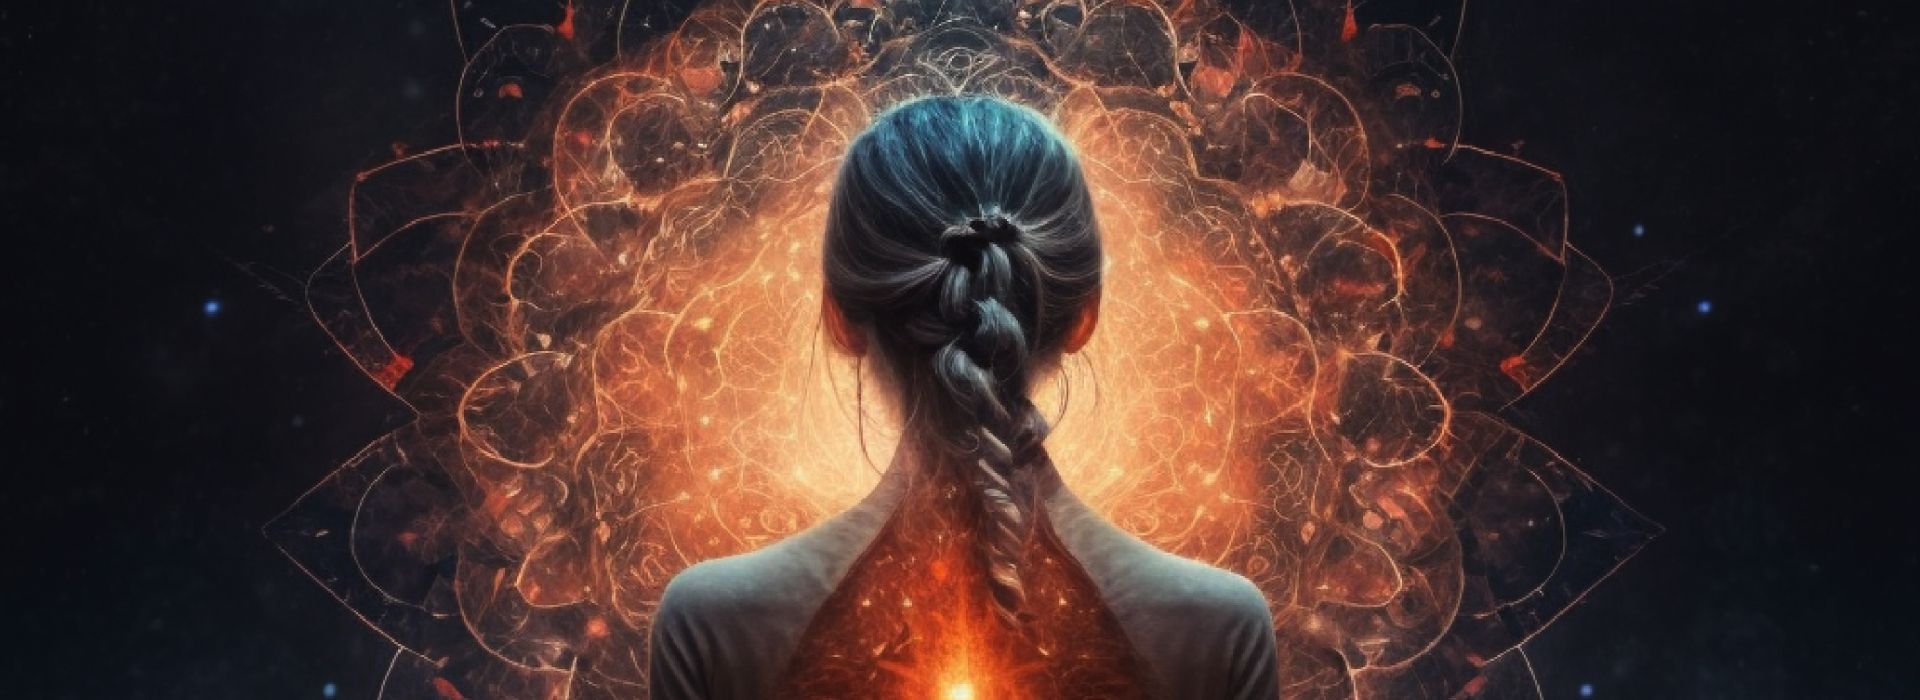 Back side bust of a woman with a braided pony tail looking towards an orange mandala expanding in space.